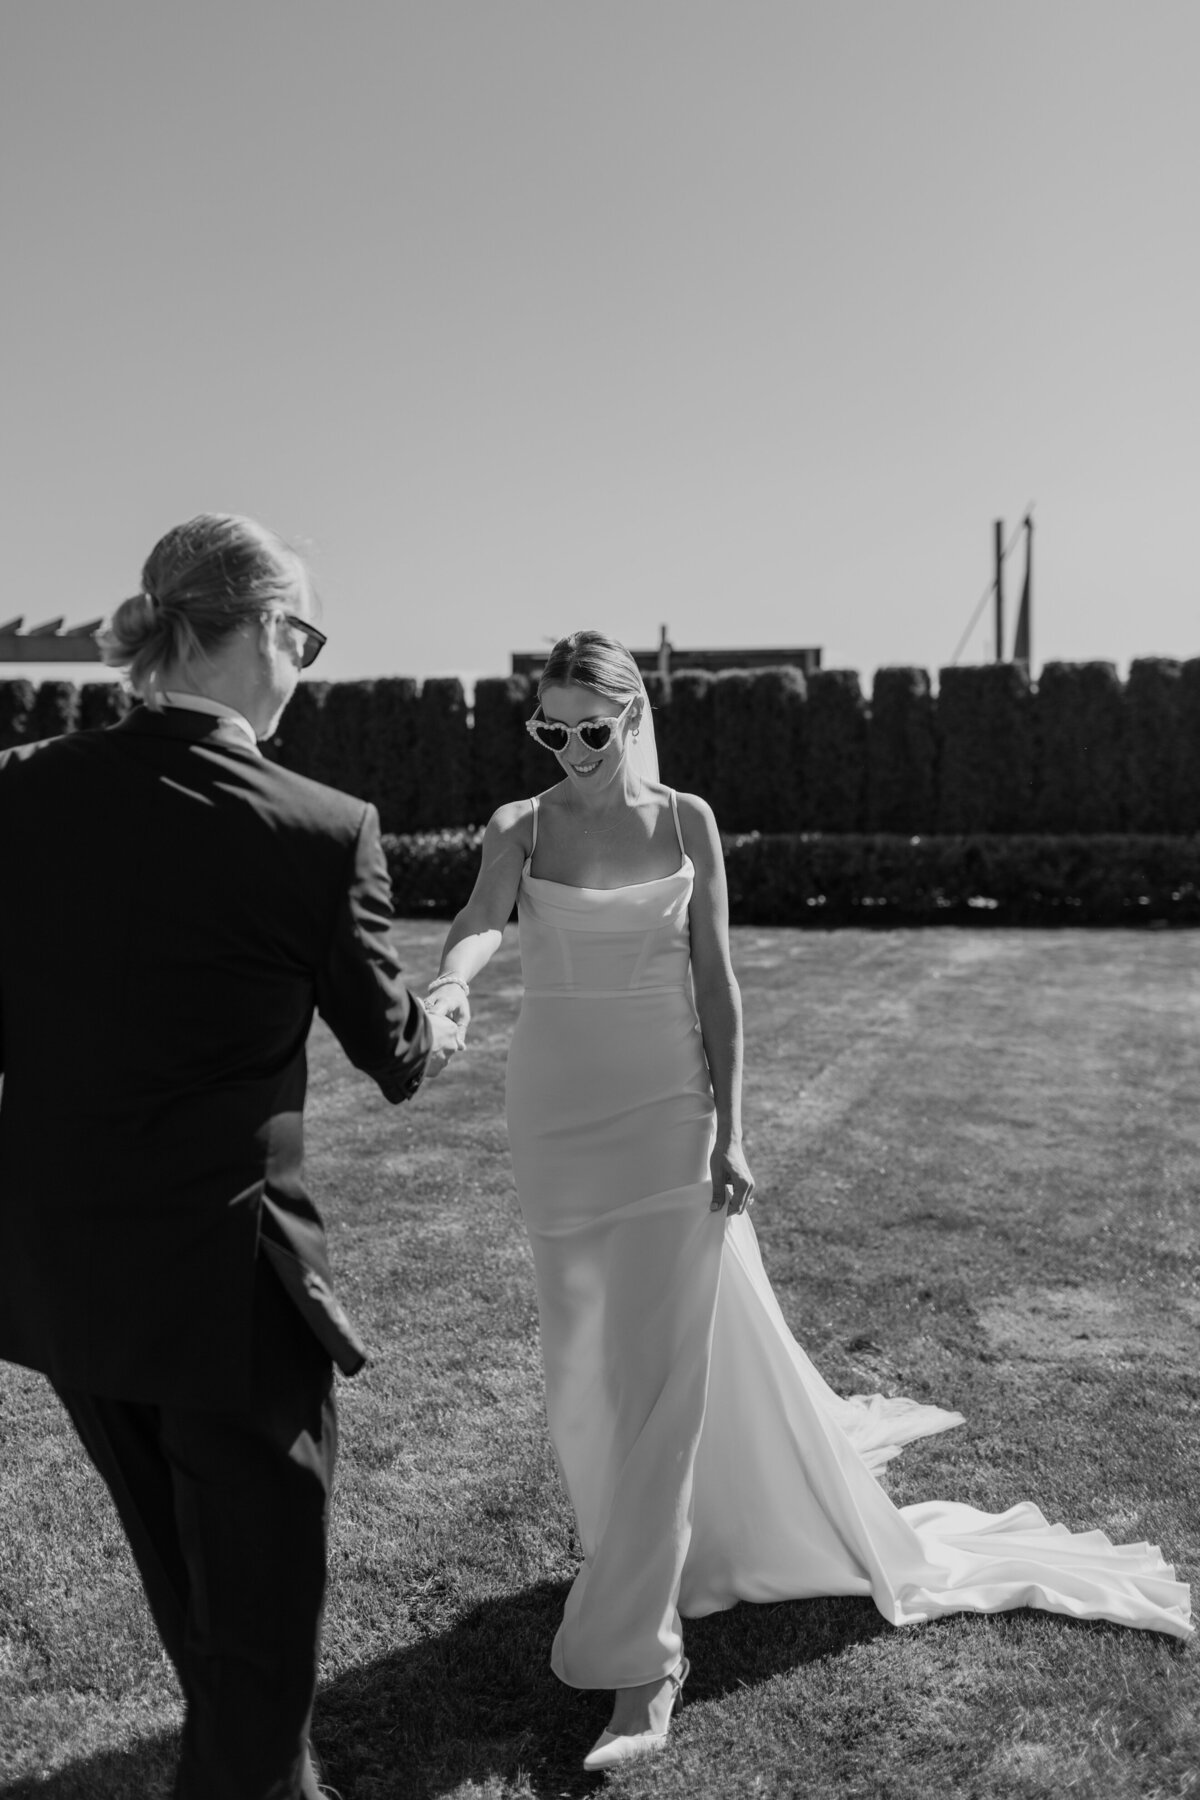 A fun candid moment of a bride and groom walking captured by Fort Worth wedding photographer, Megan Christine Studio